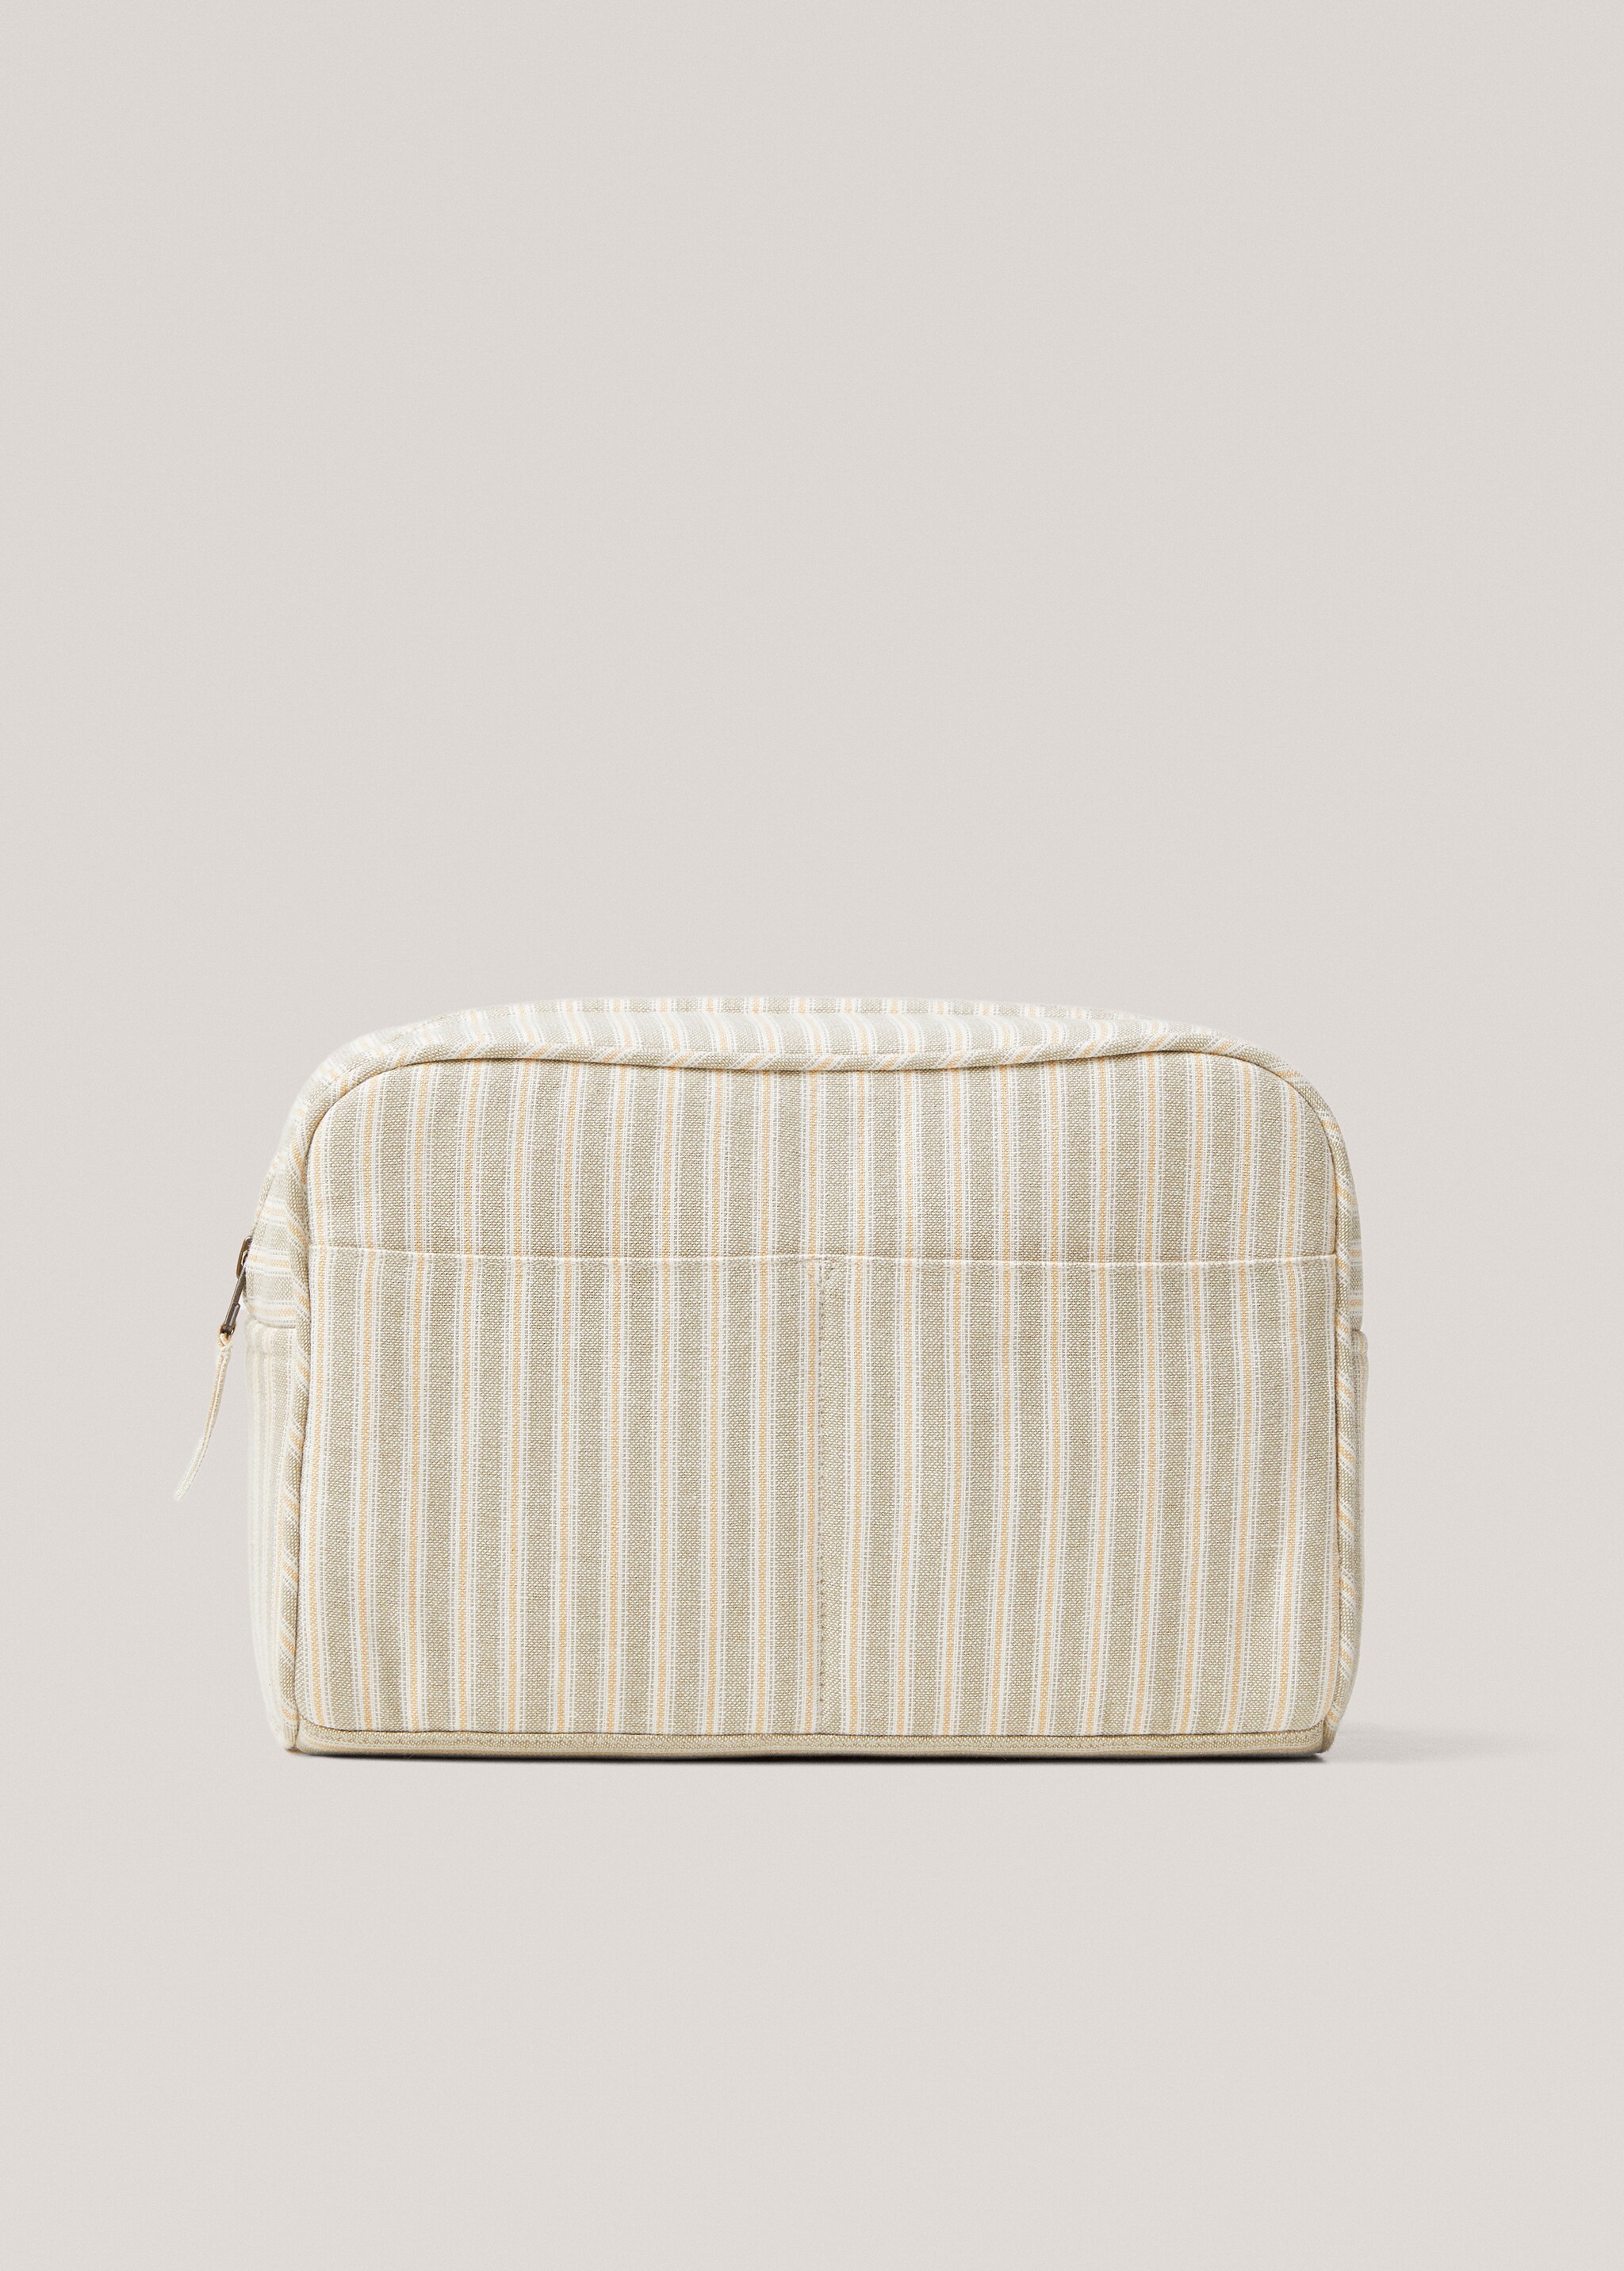 Striped cotton toiletry bag - Article without model